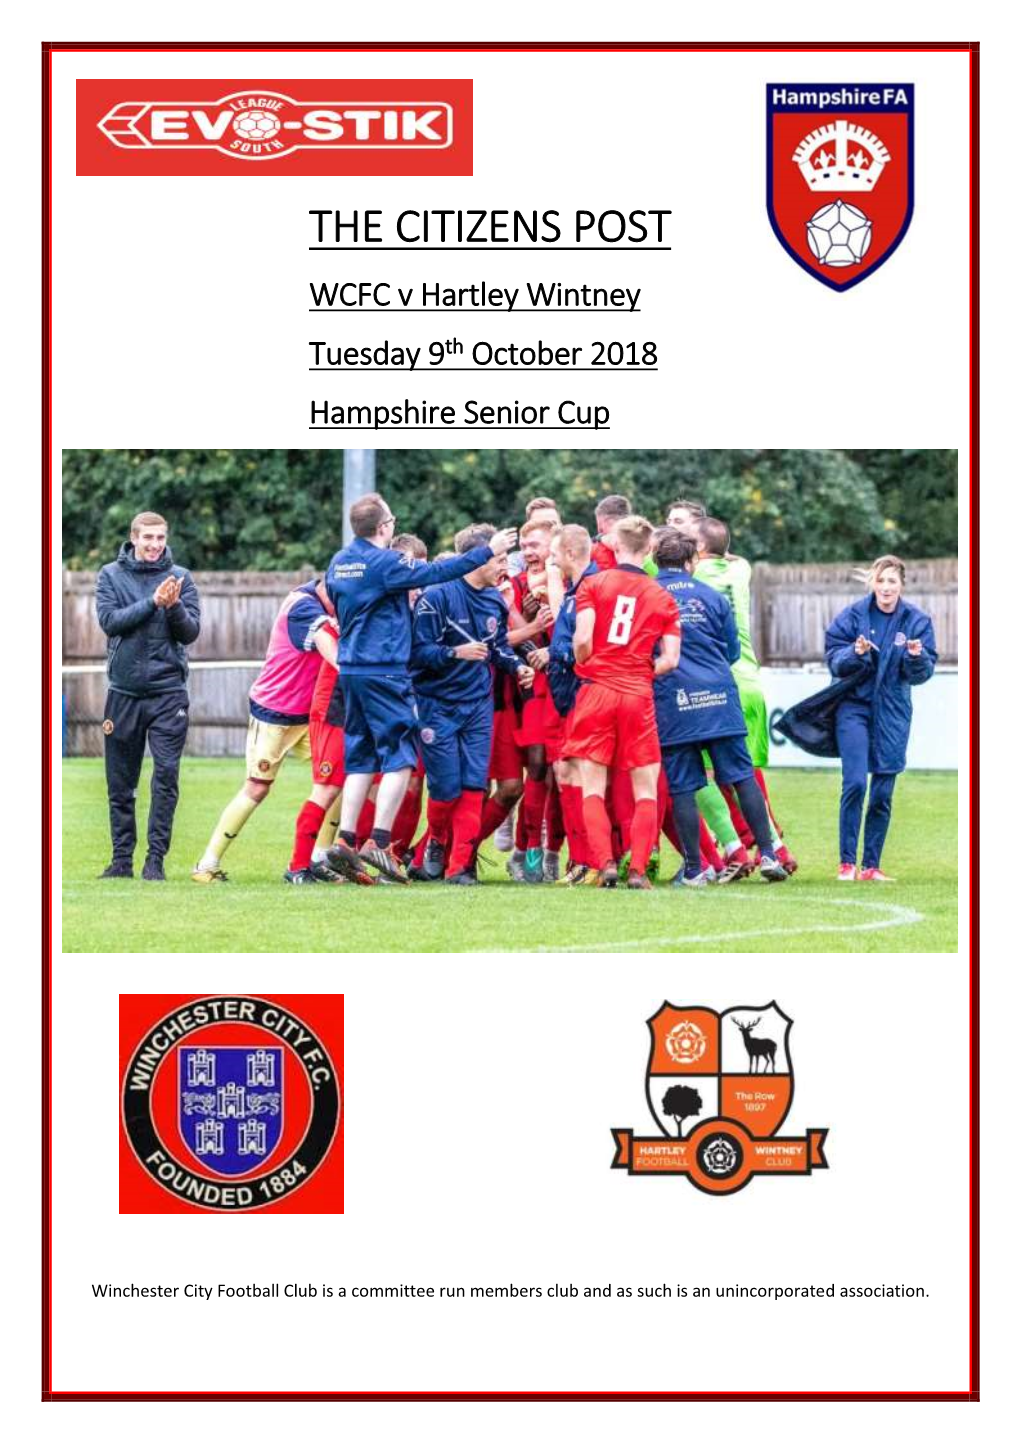 THE CITIZENS POST WCFC V Hartley Wintney Tuesday 9Th October 2018 Hampshire Senior Cup